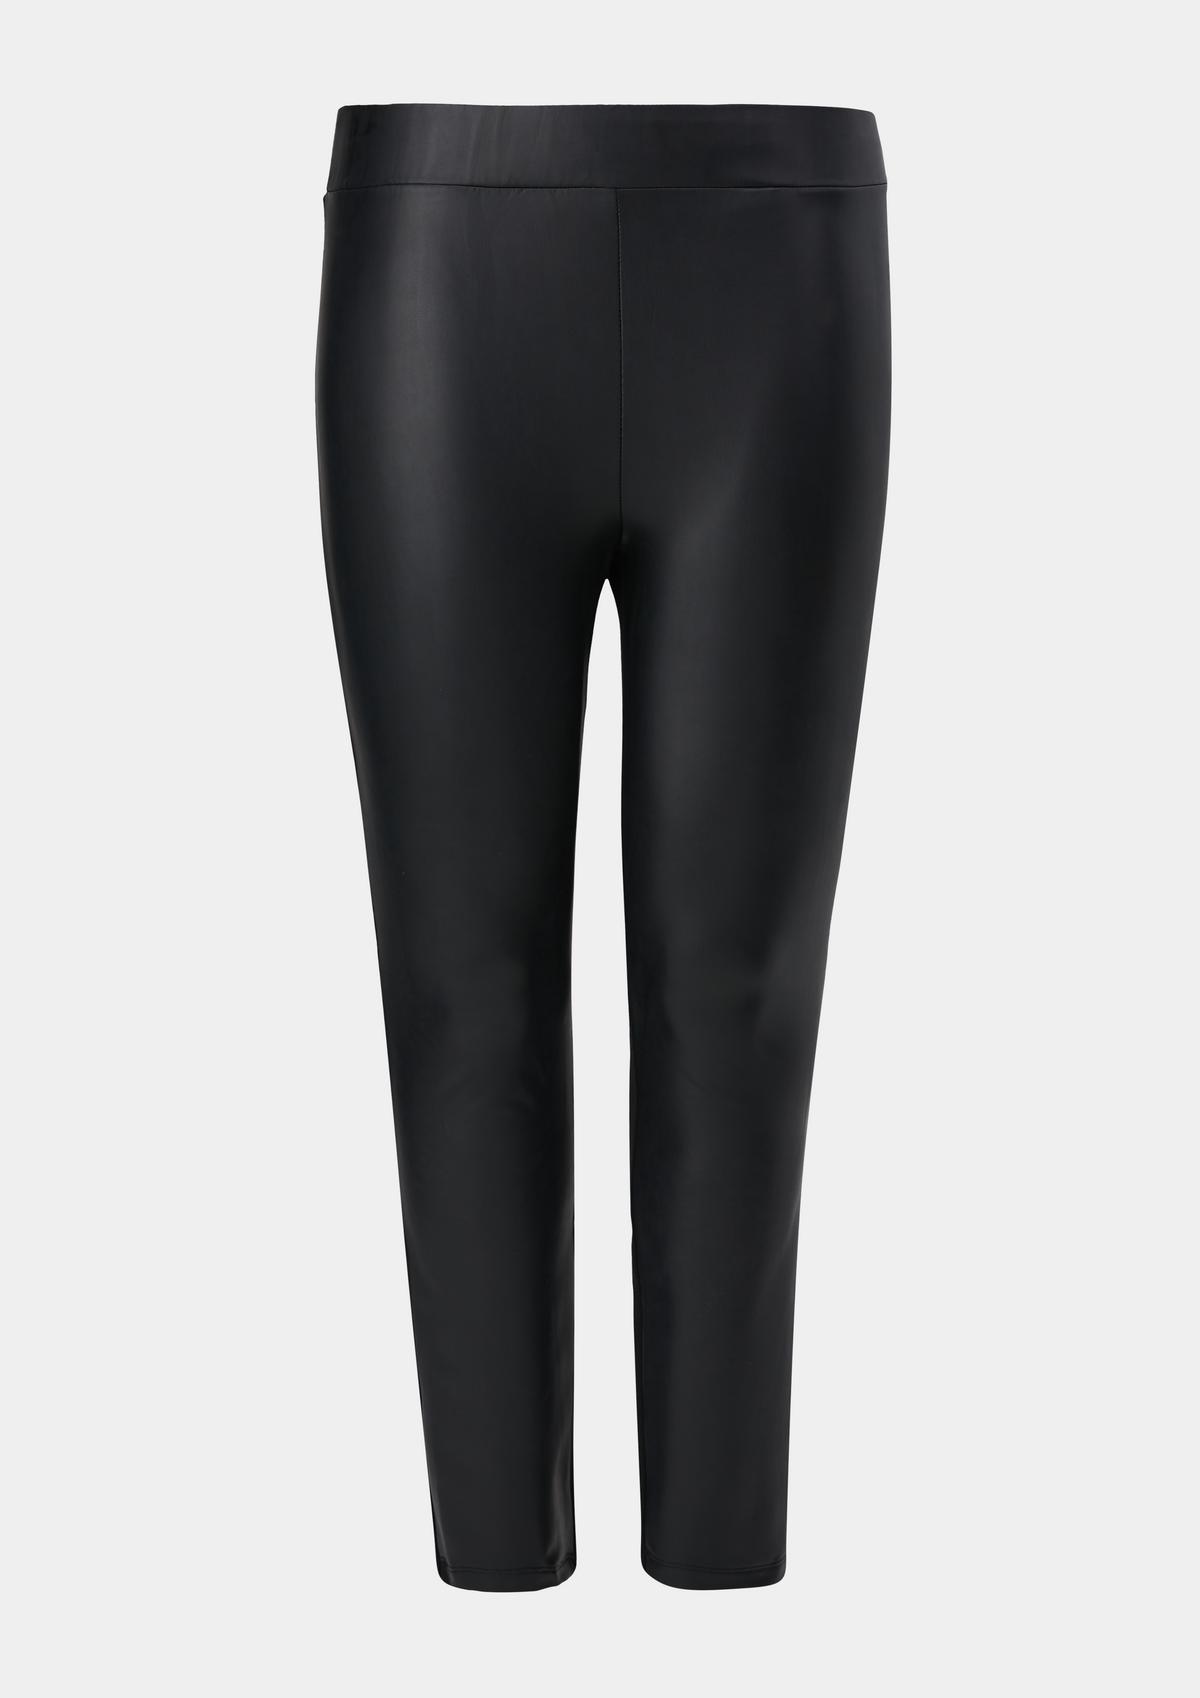 s.Oliver Leggings with a leather-look front